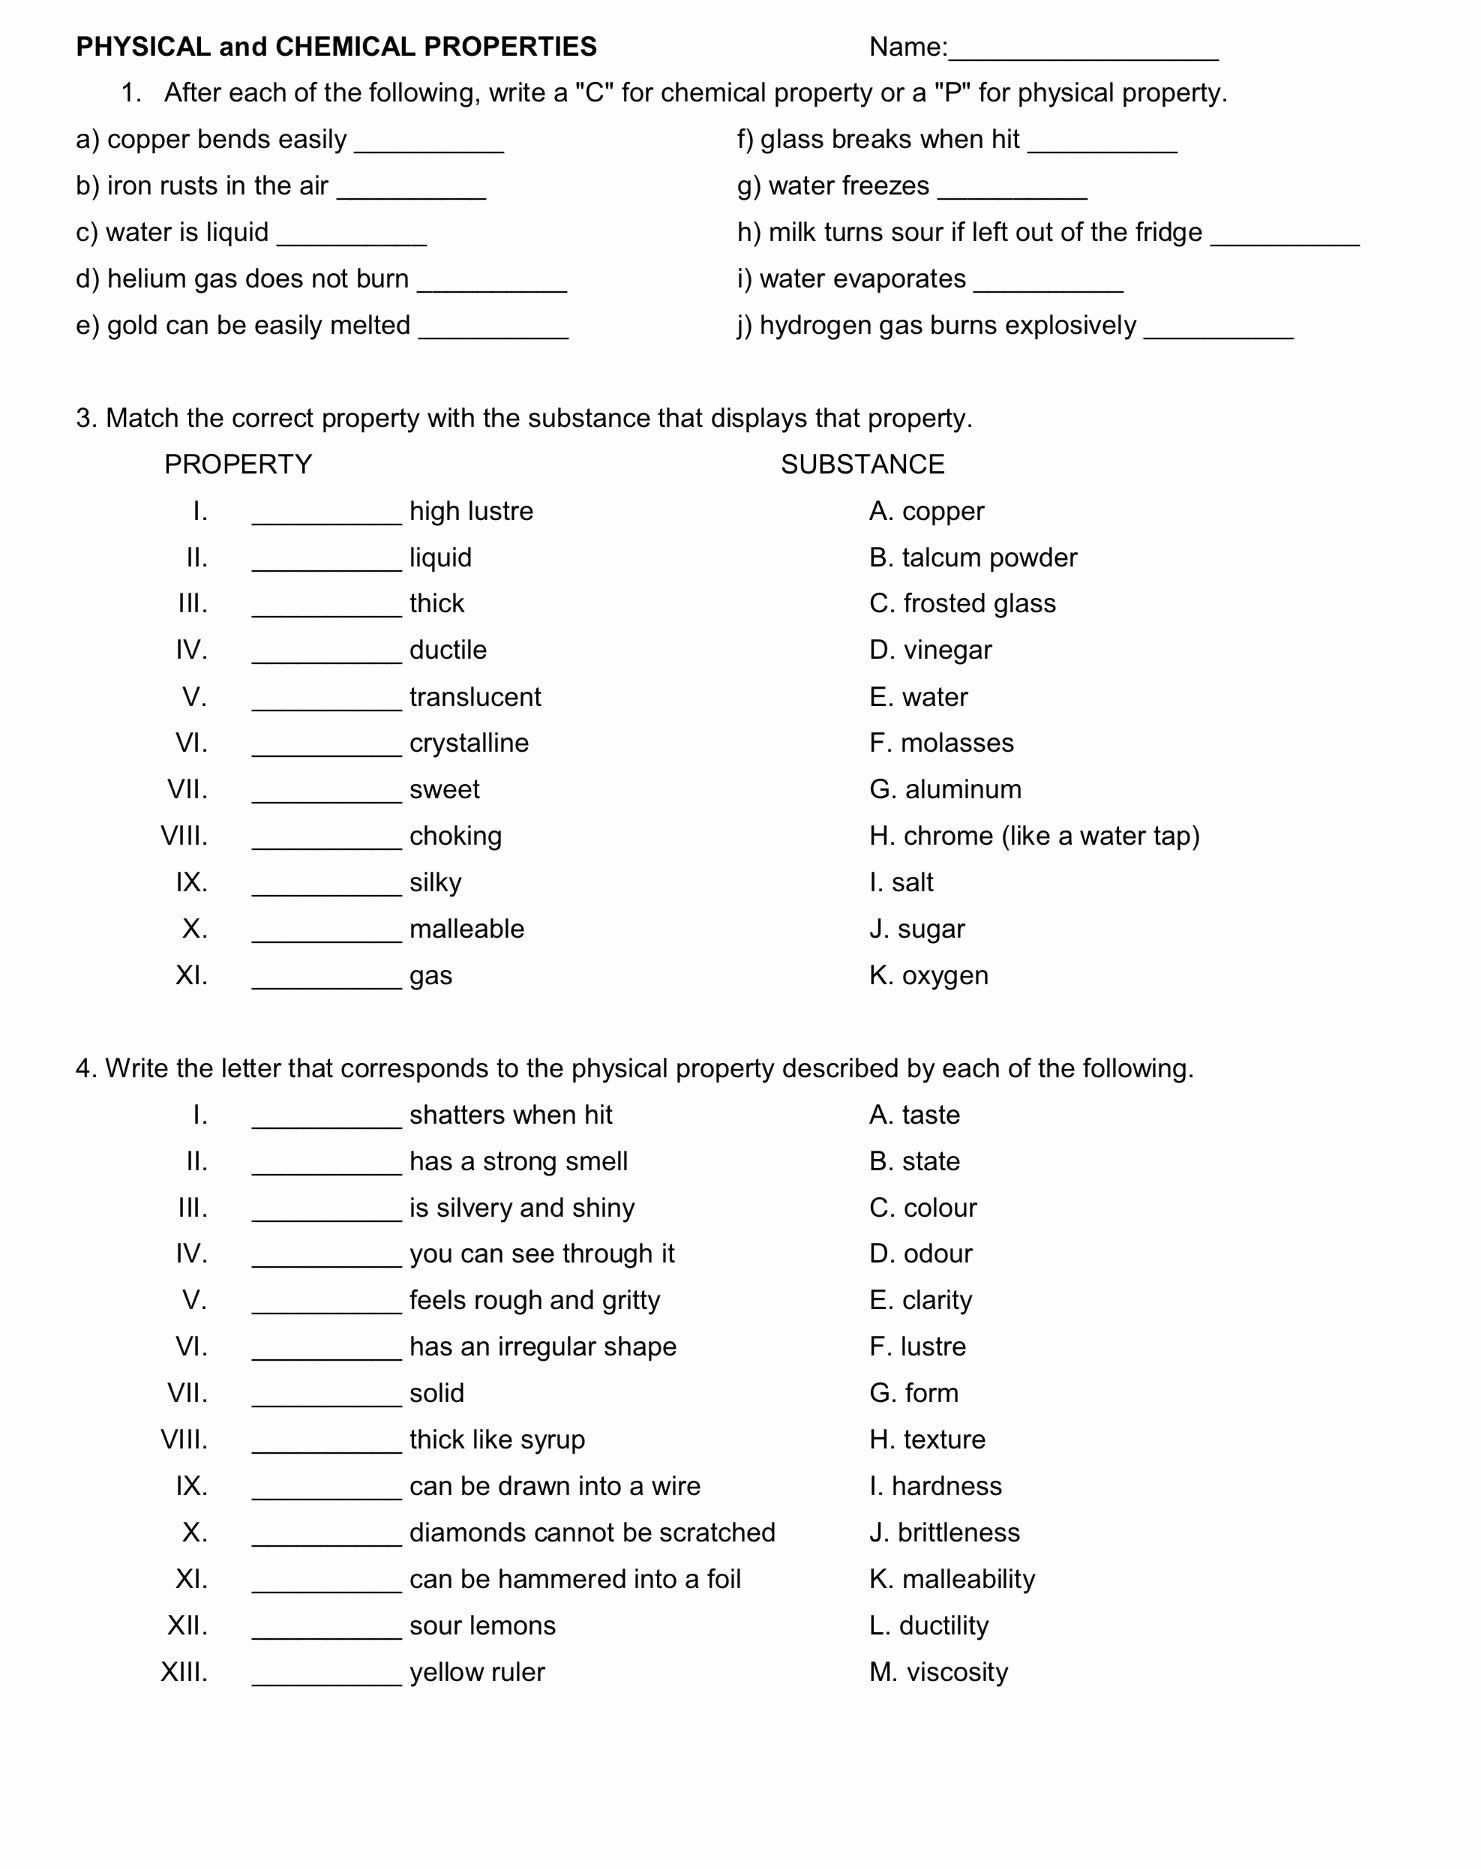 Physical and Chemical Properties Worksheet Physical and Chemical Properties Worksheet Luxury Physical